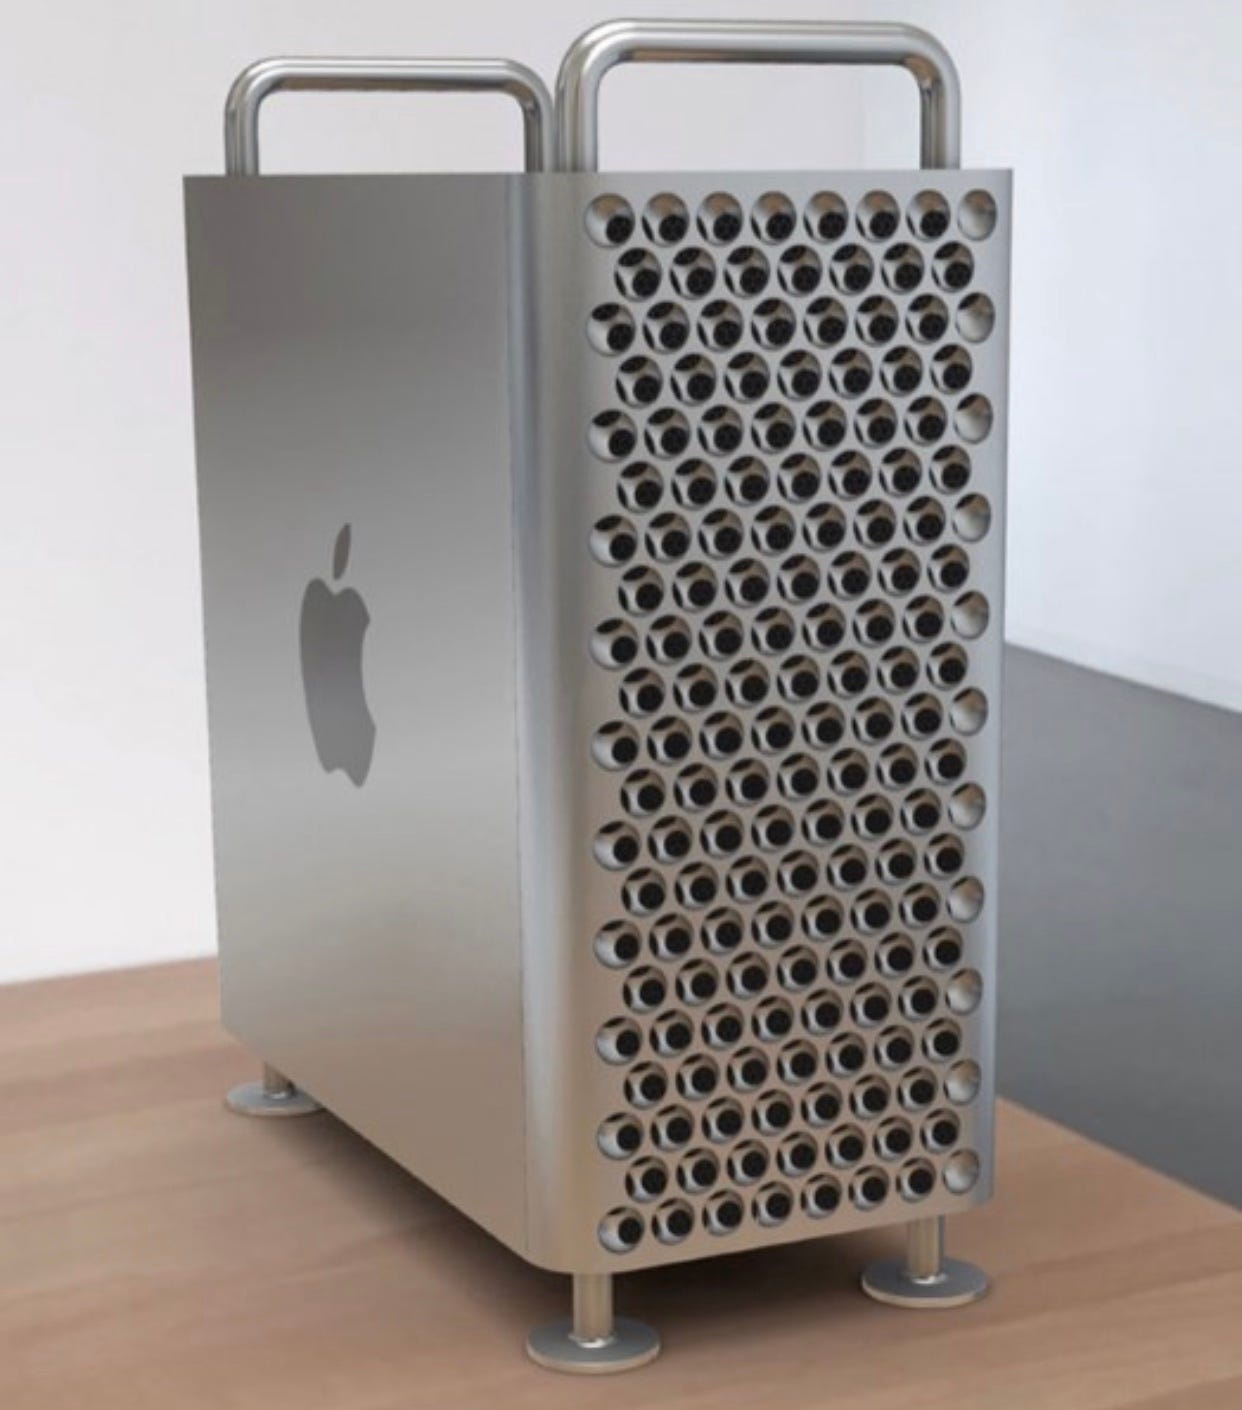 From a trash can to a cheese grater: An analysis of Apple's bizarre design  choices., by Inventagious, Future Vision